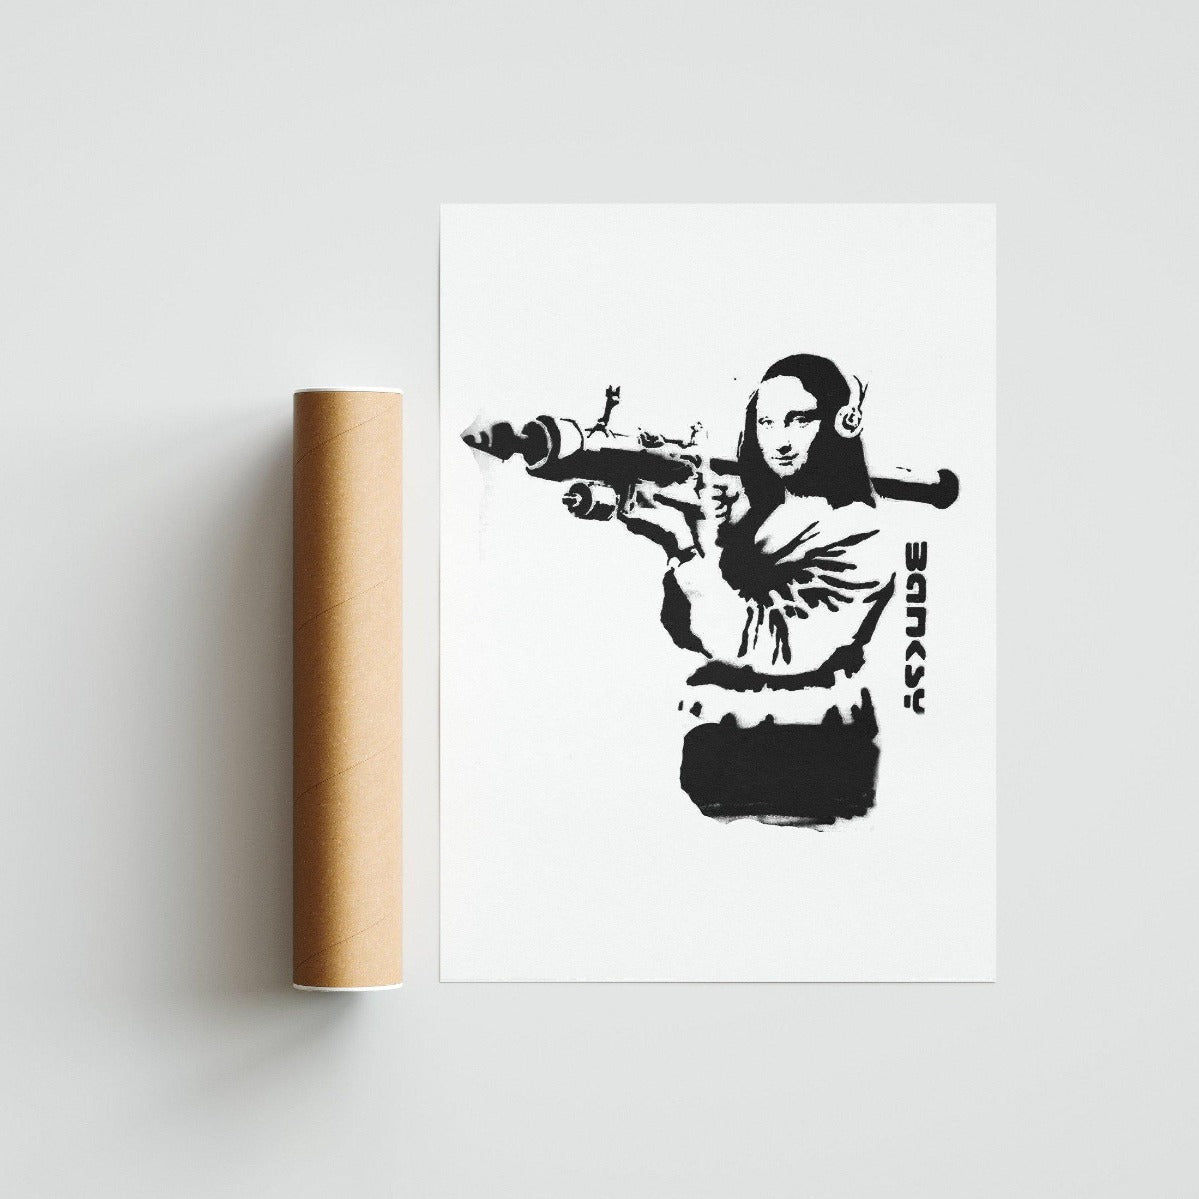 This poster is an iconic piece of street art. The enigmatic Mona Lisa by Banksy is now available as a high-quality poster. This poster is a must-have for any art lover or street art enthusiast. Printed on thick, high-quality paper, this poster is a stunning addition to any wall. - 98types